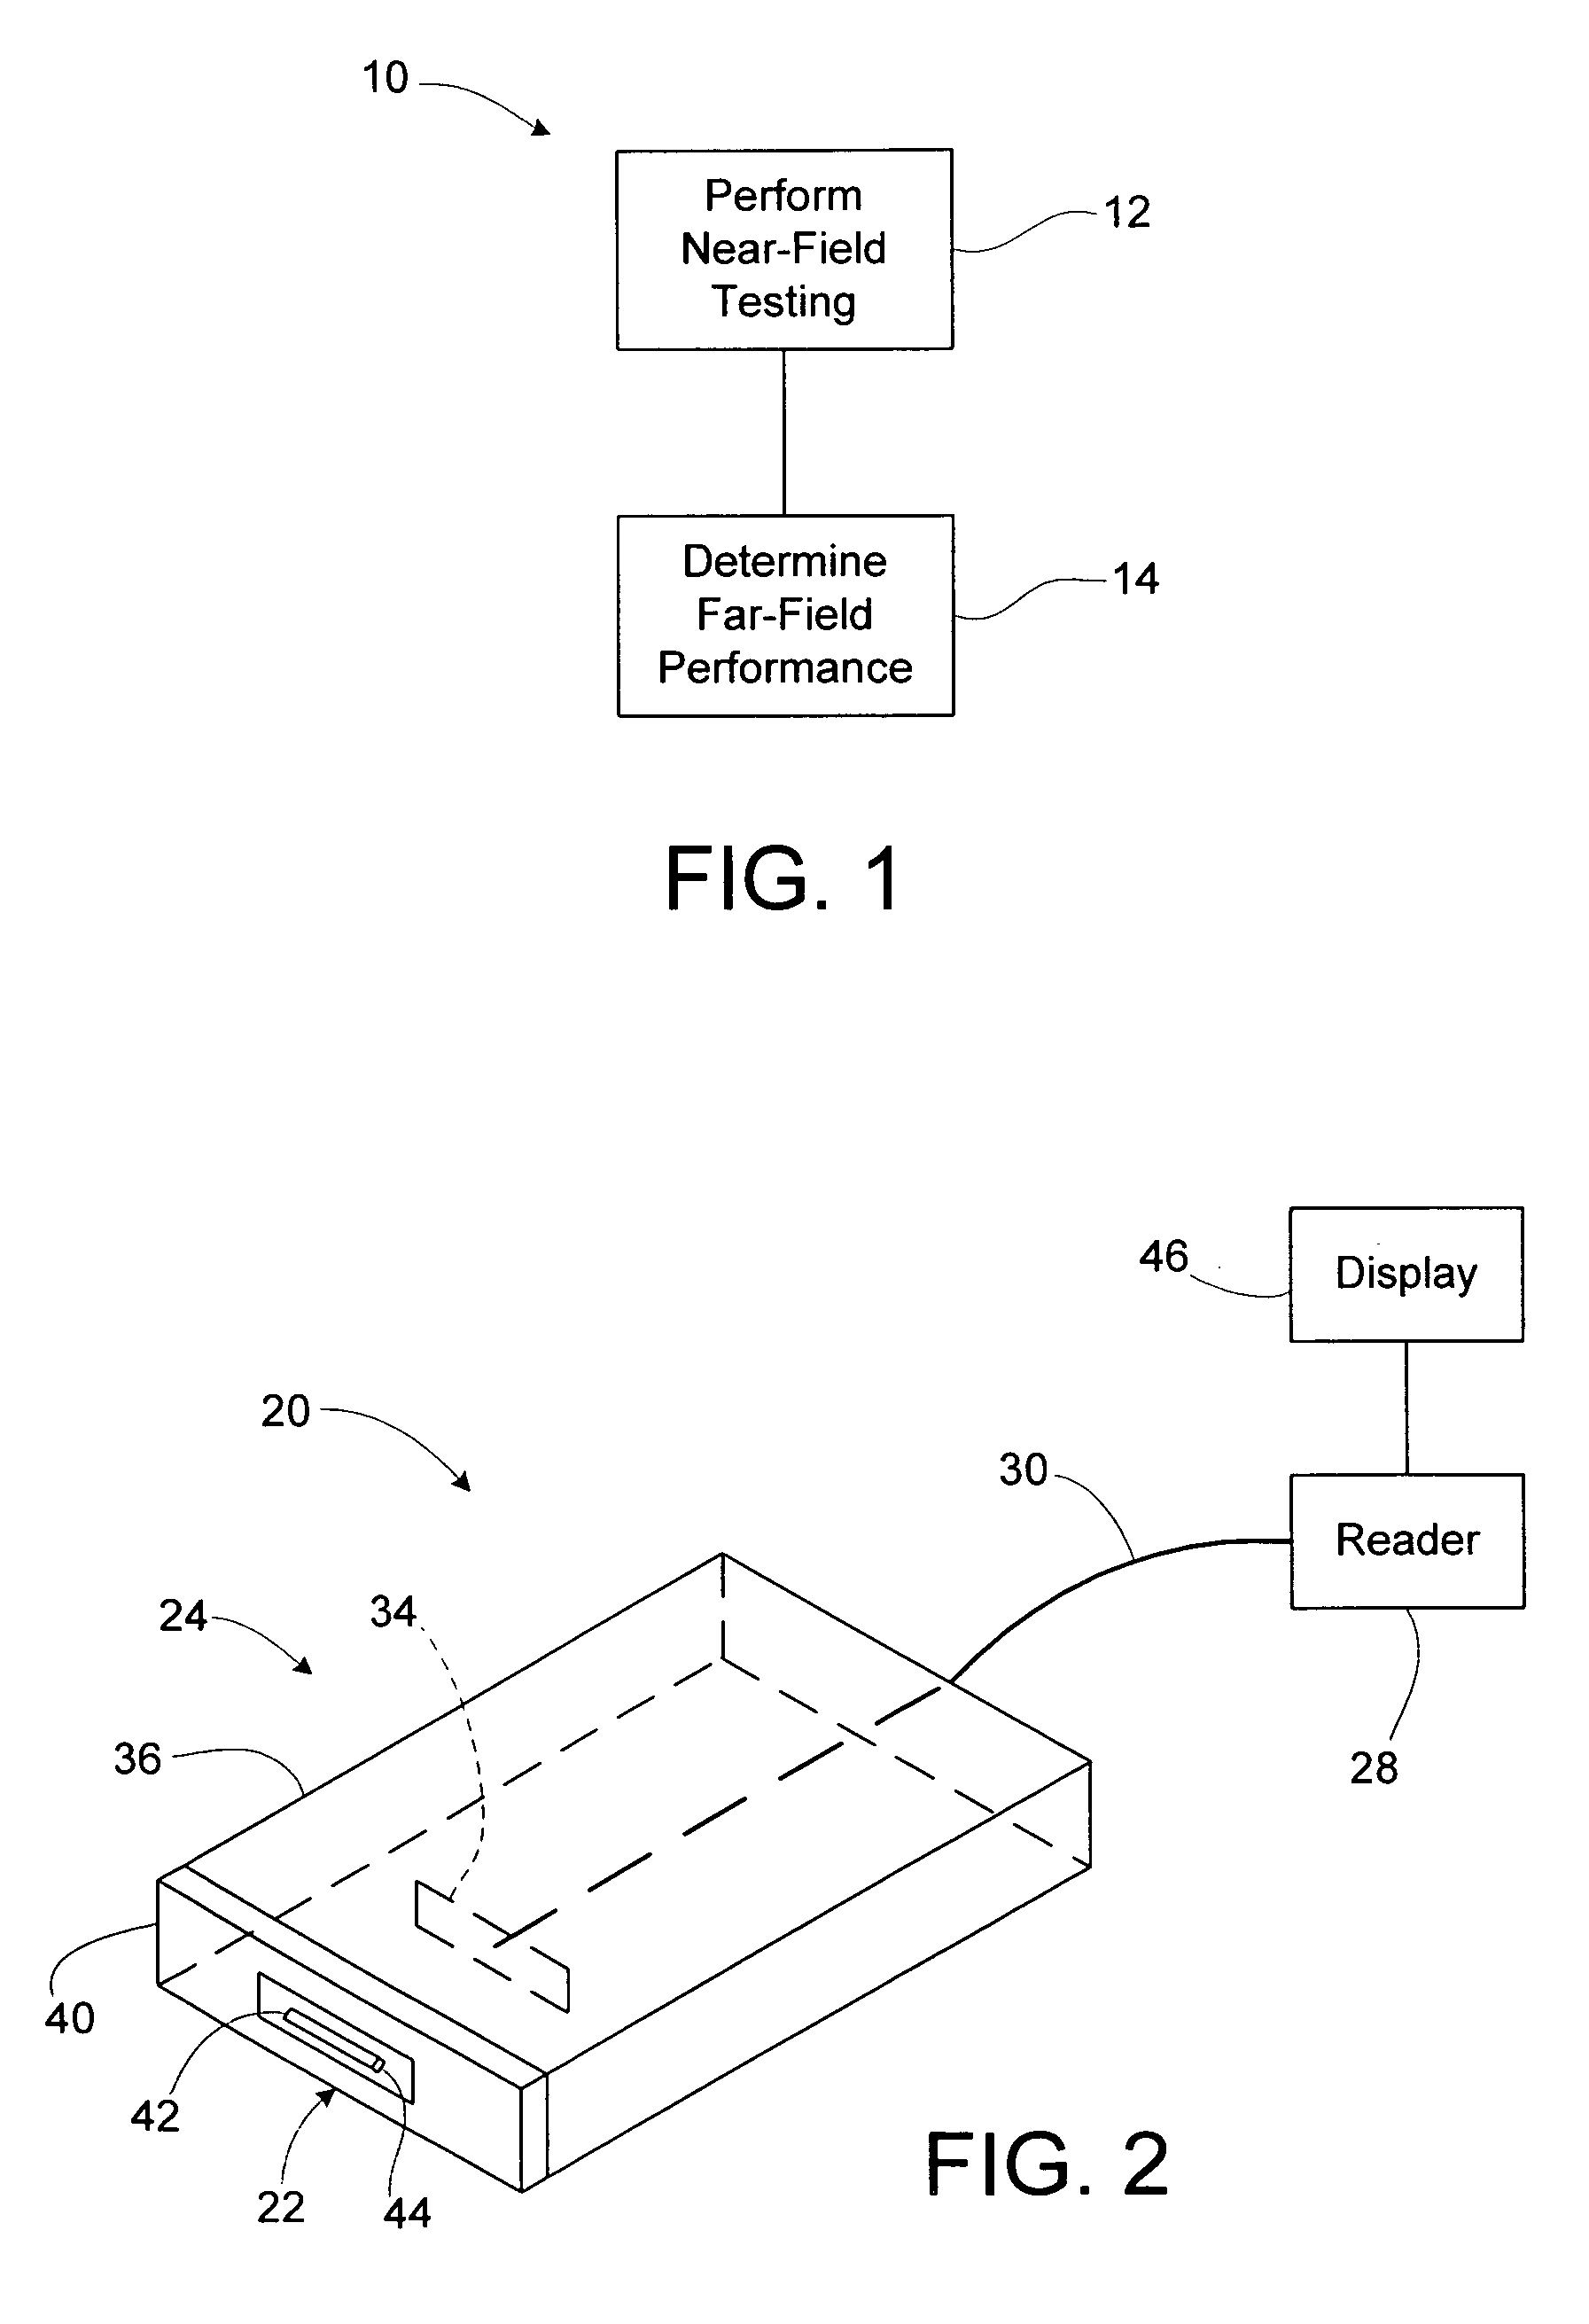 Method of determining performance of RFID devices